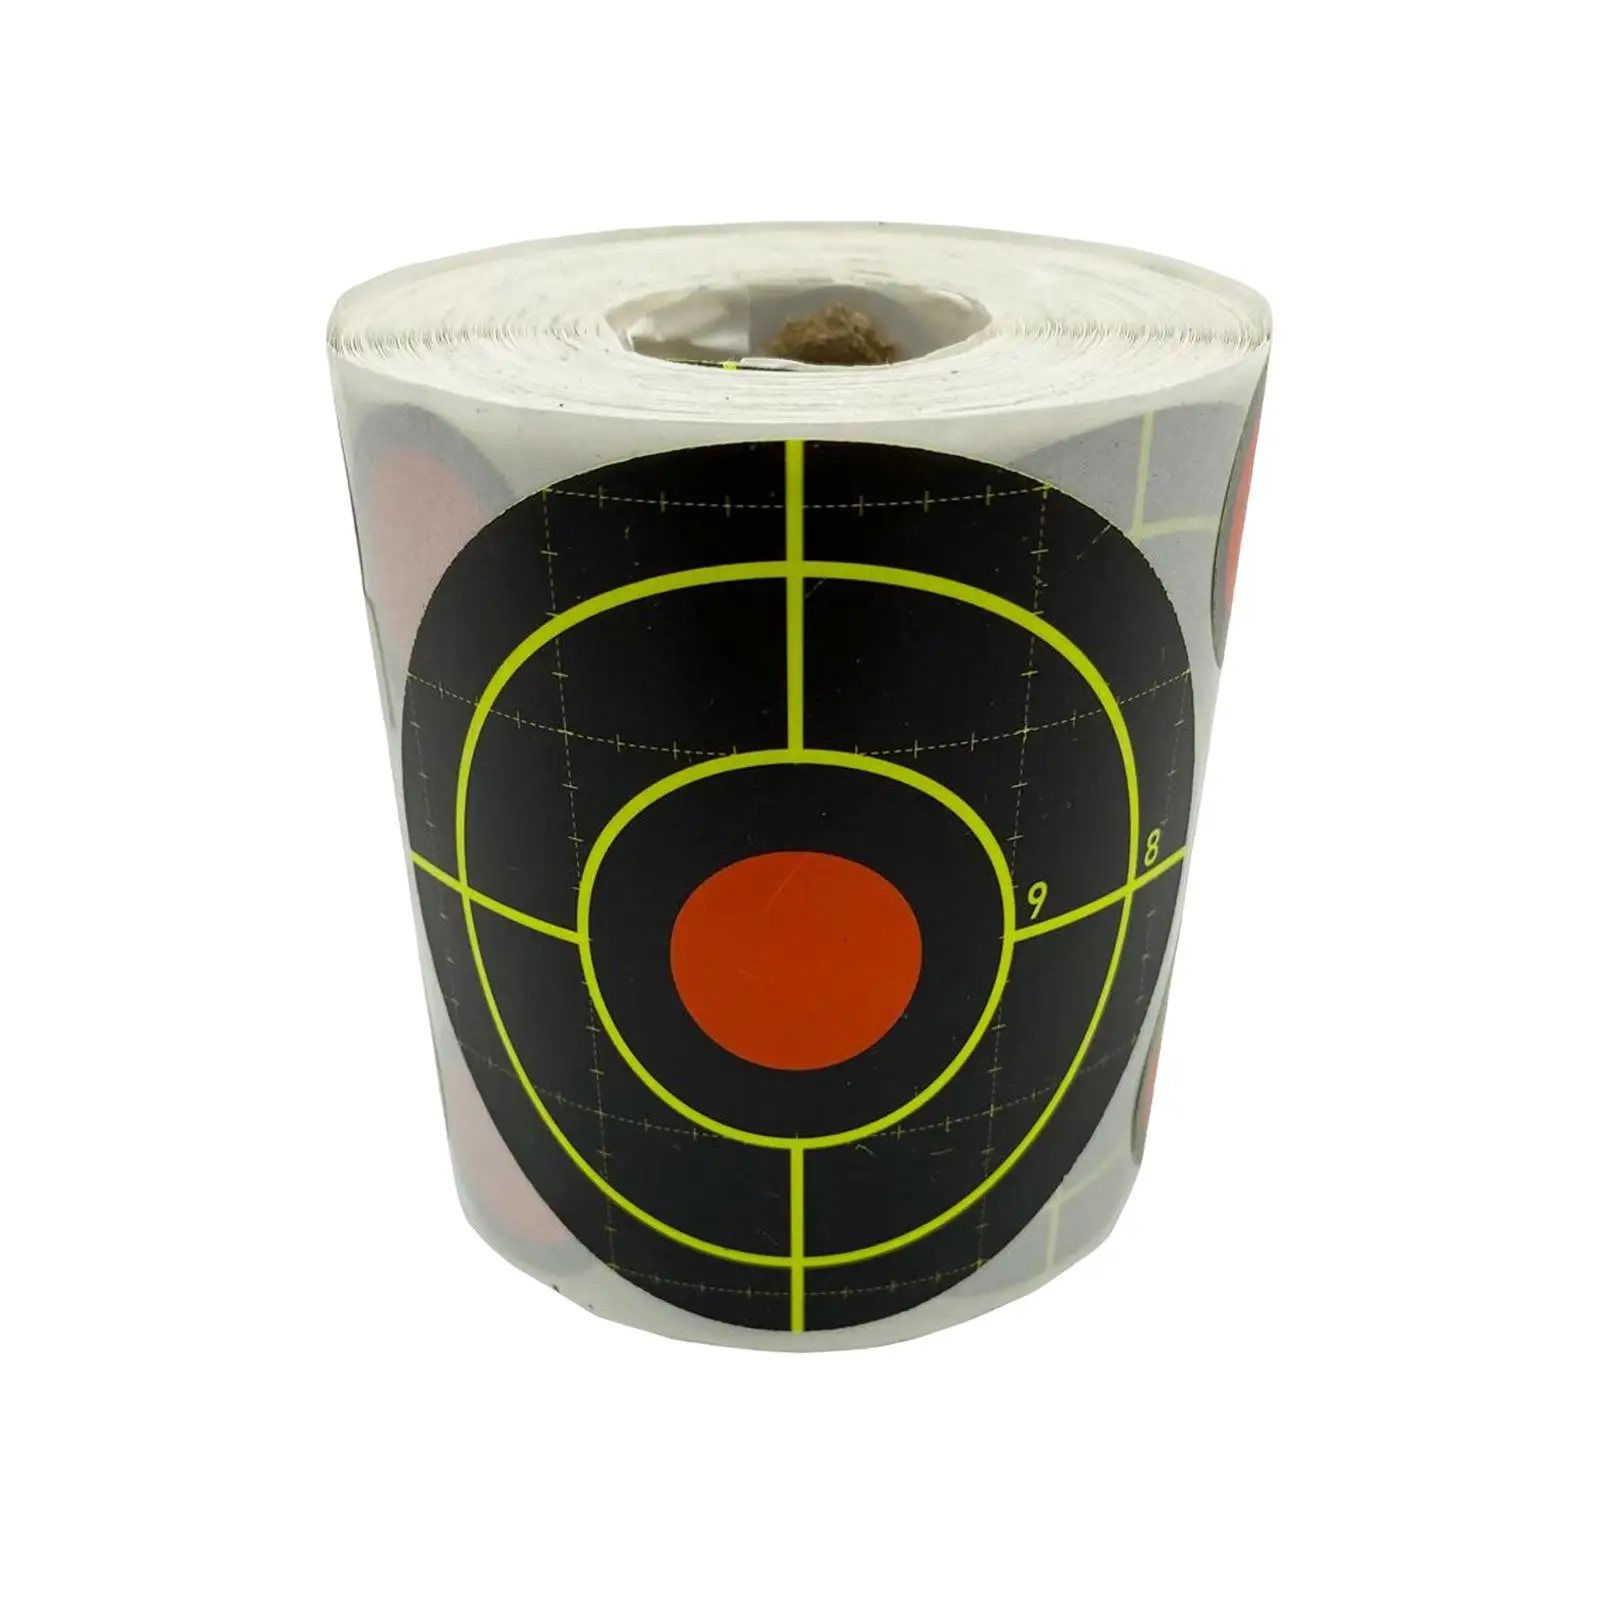 200Pcs Splatter Targets Self Adhesive Targets Stickers Paper Targets Roll